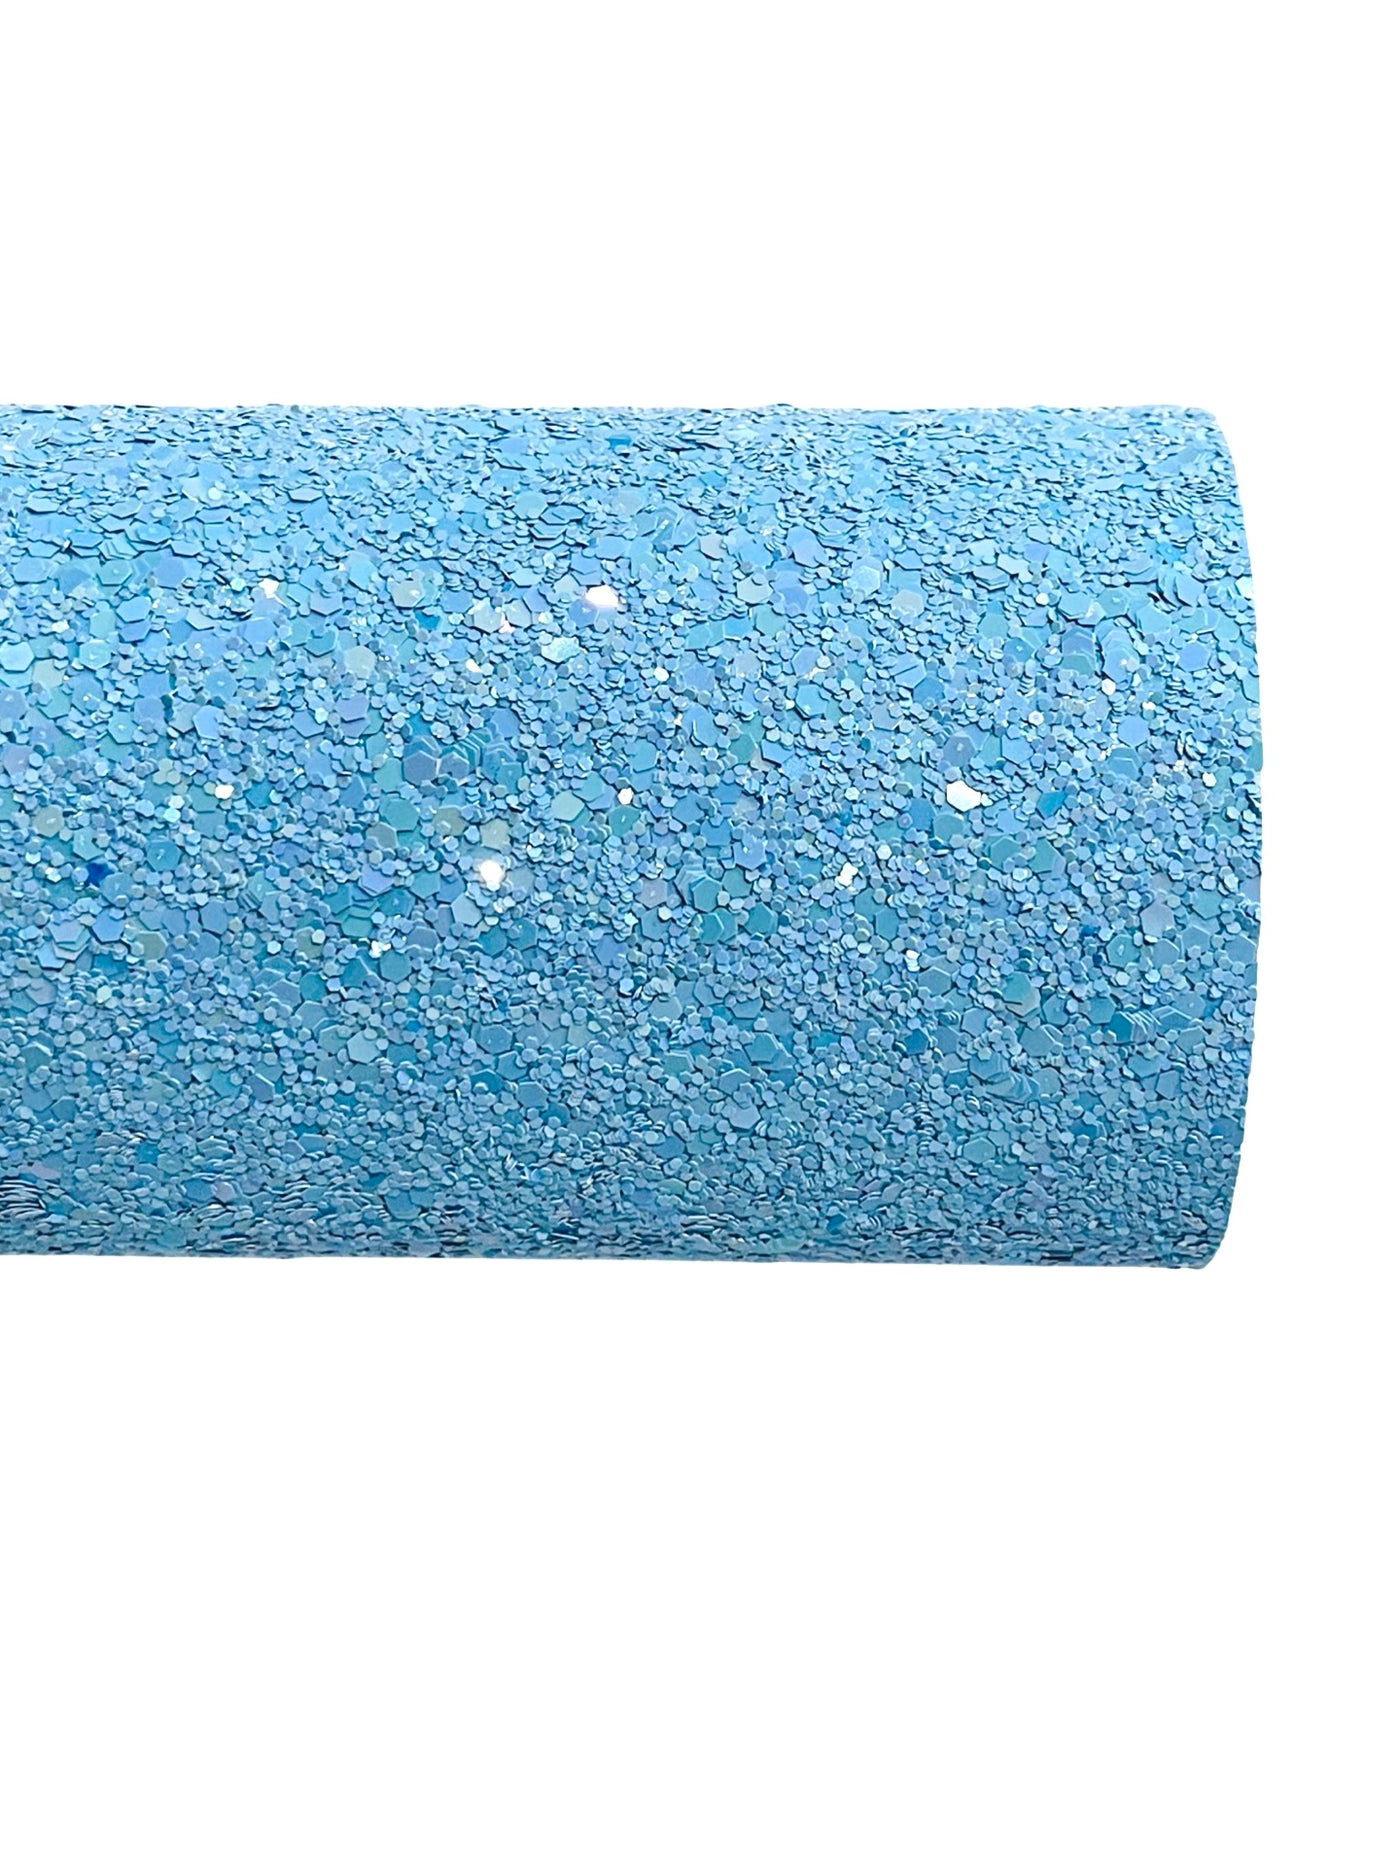 Princess Blue Glitter Fabric - now with white felt rear